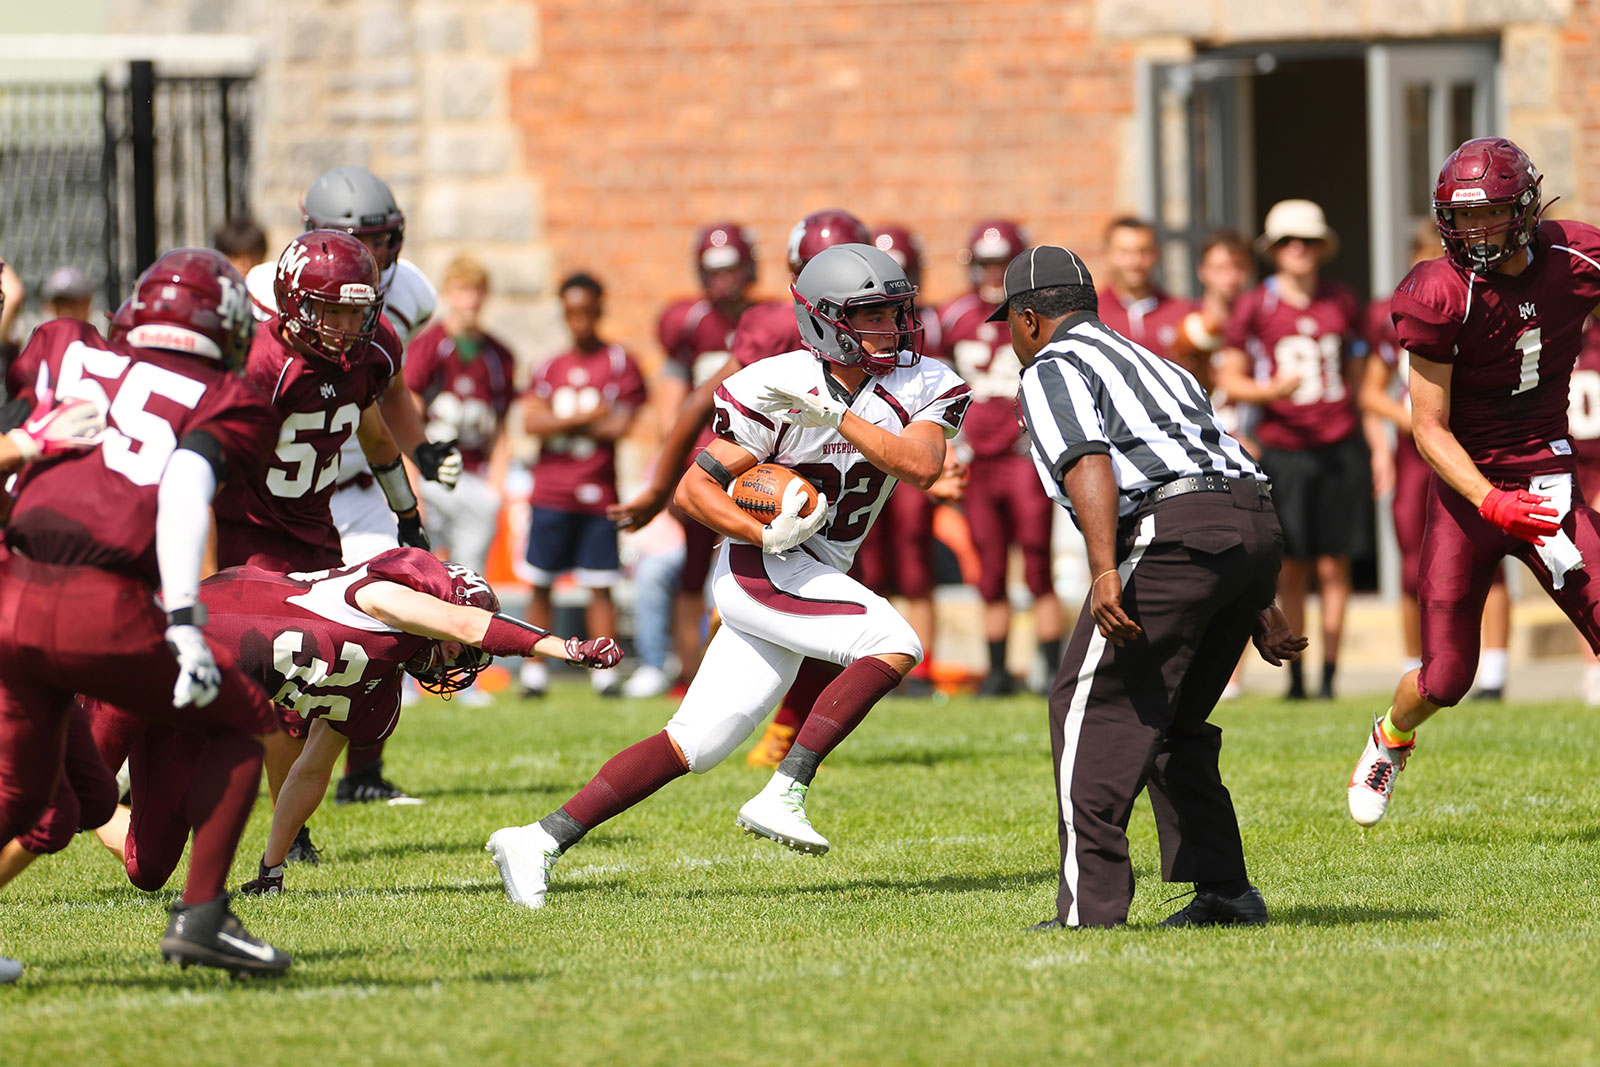 A Riverdale football play runs down the fall with the ball as a referee watches.